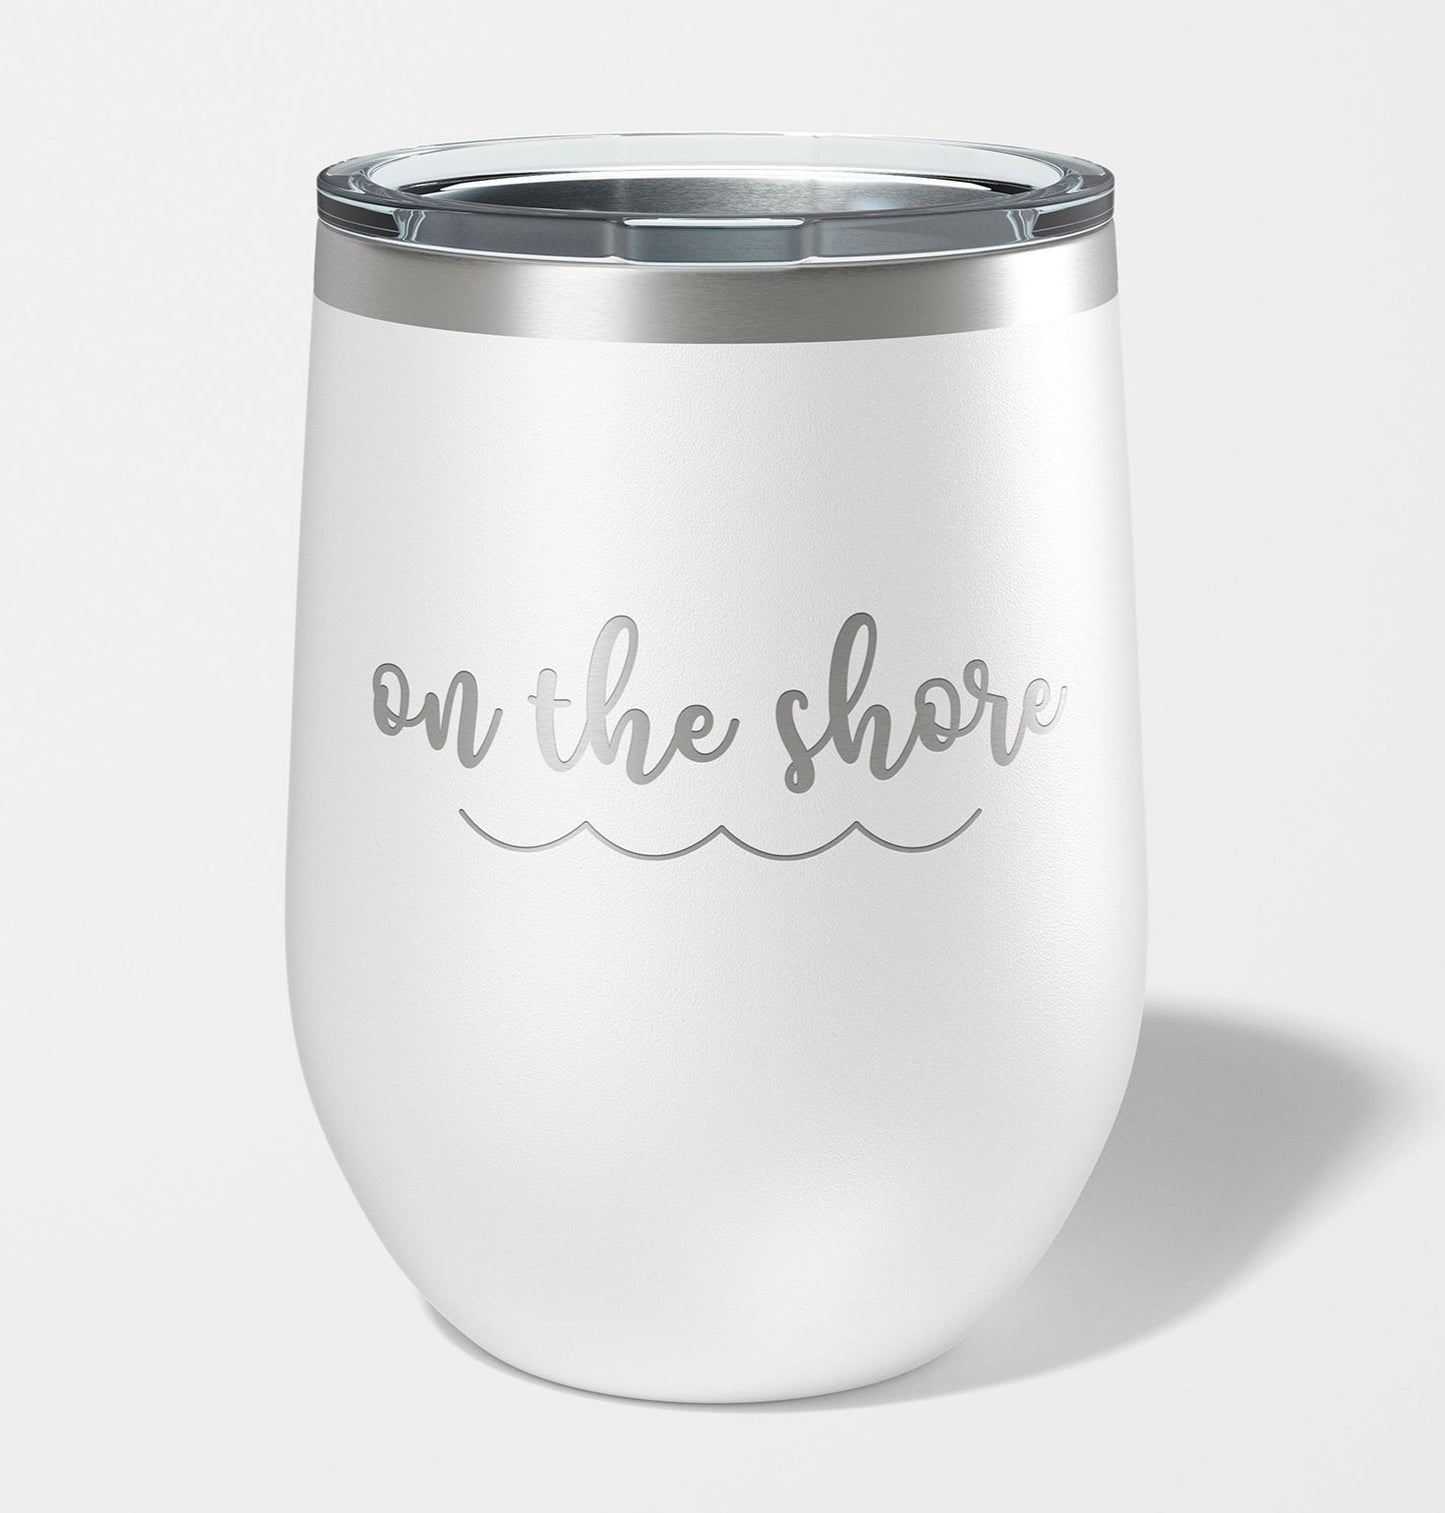 On the Shore 12 oz. Insulated Stemless Wine Tumbler